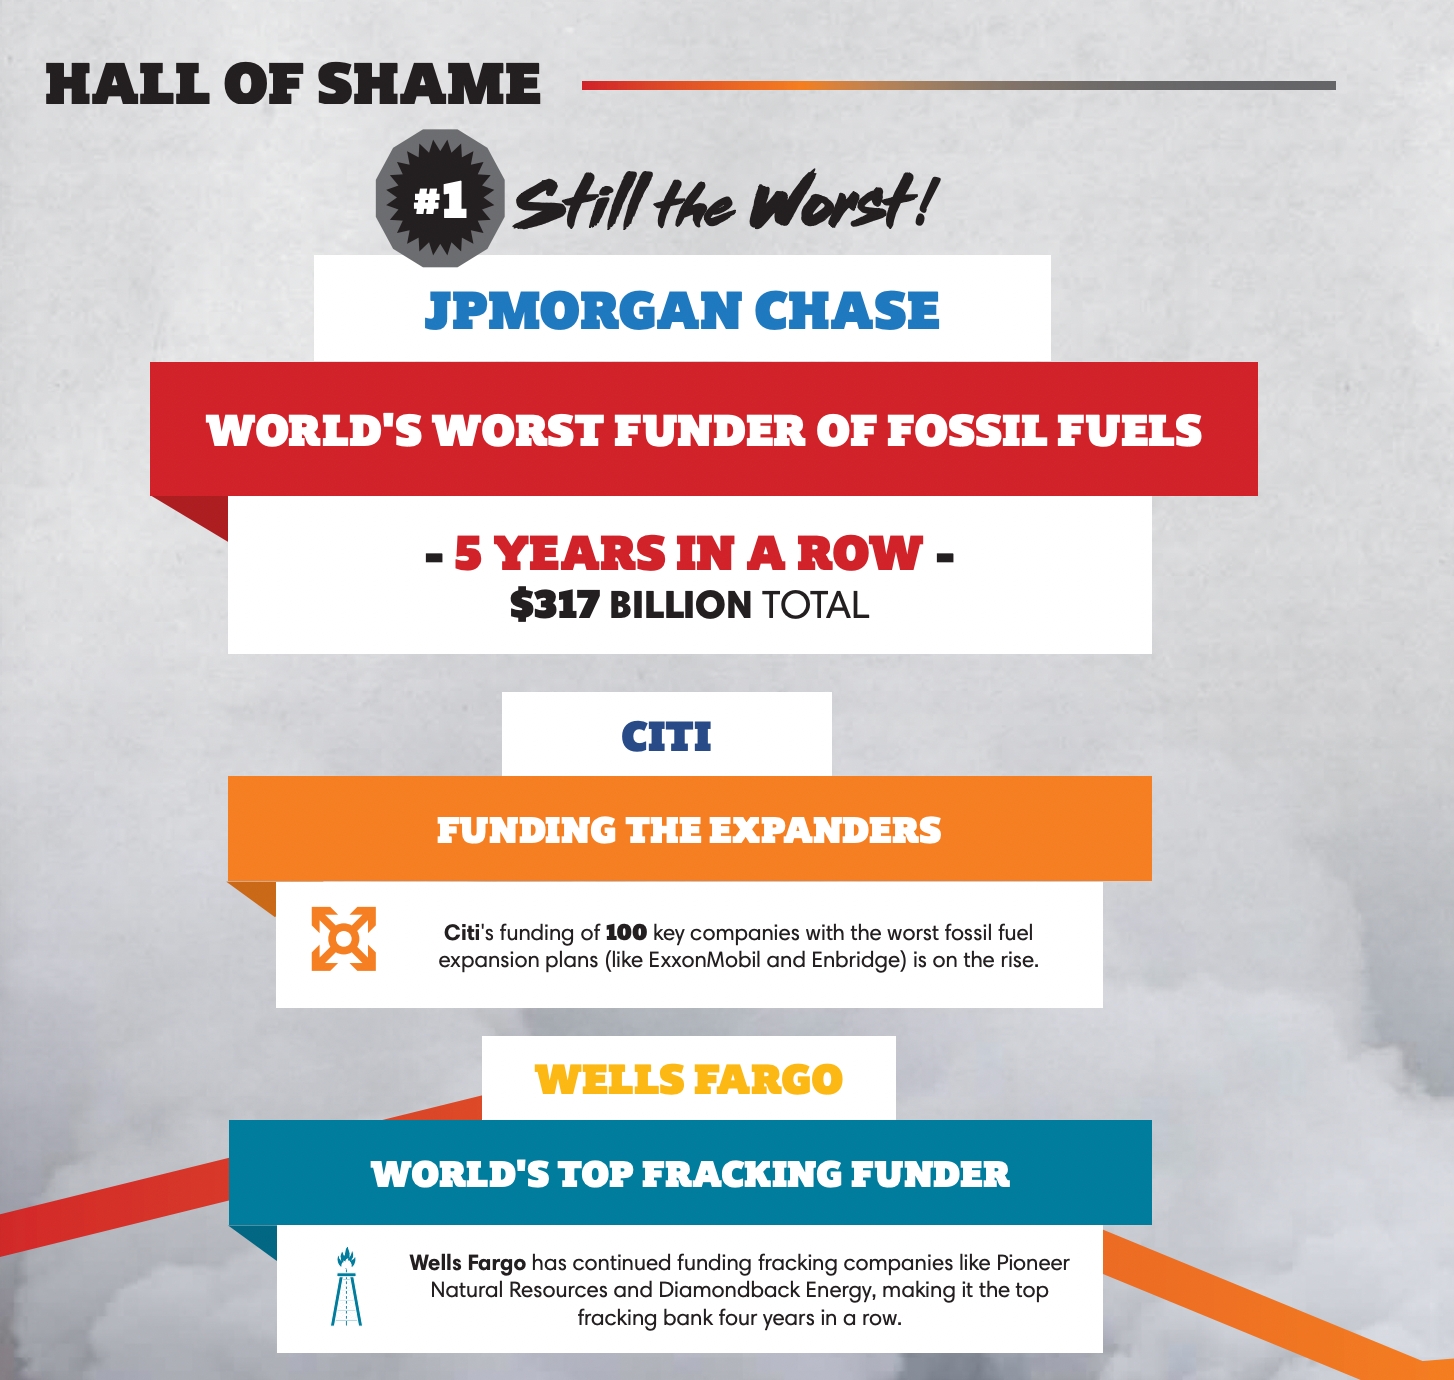 Screen shot from report showing the "Hall of Shame" worst Banks who contribute to big oil and climate change.